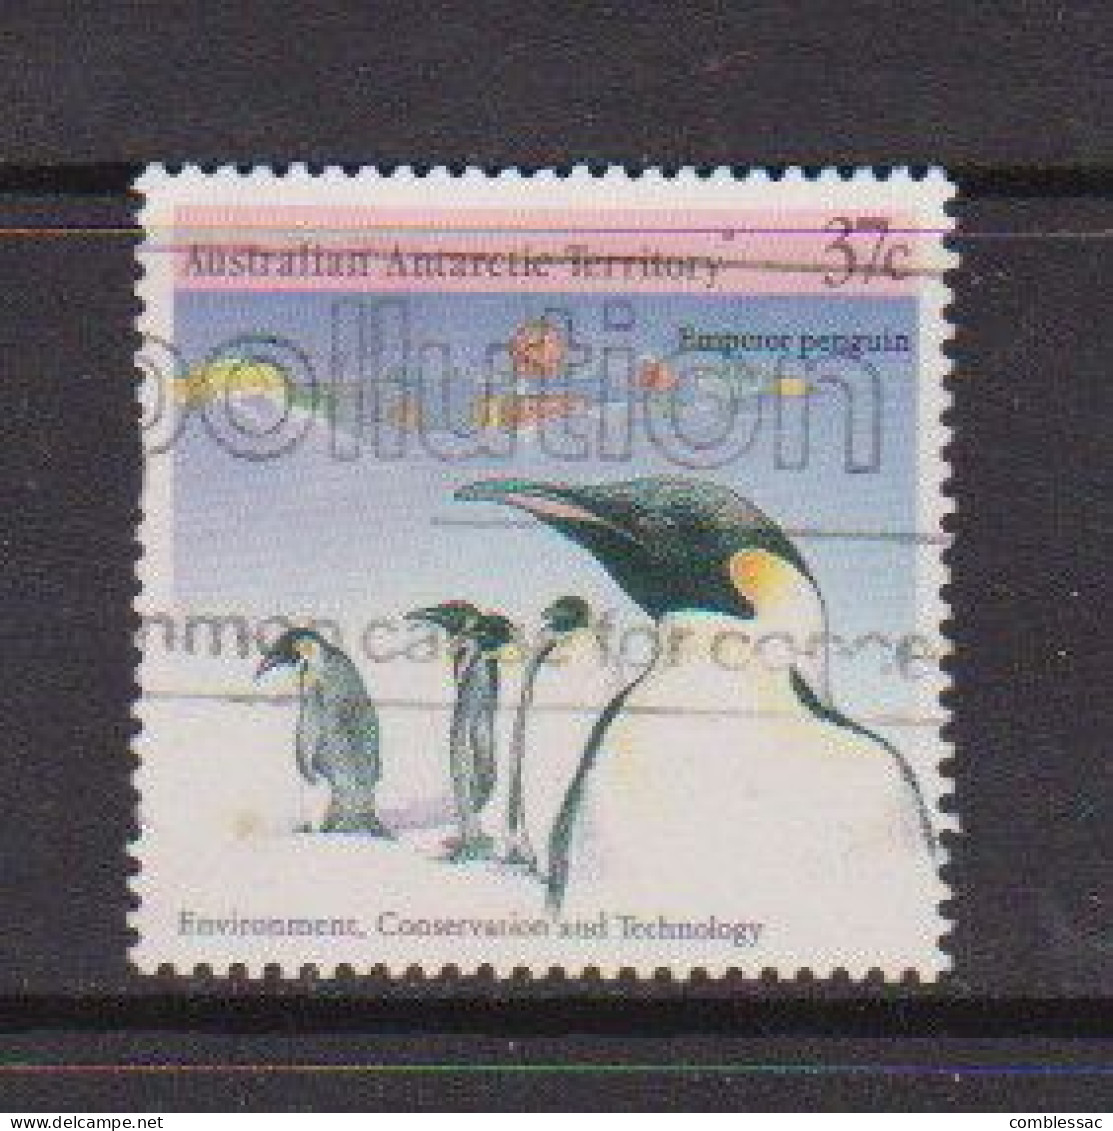 AUSTRALIAN  ANTARCTIC  TERRITORY    1988    Enviroment  Conservation    37c  Penguins    USED - Used Stamps